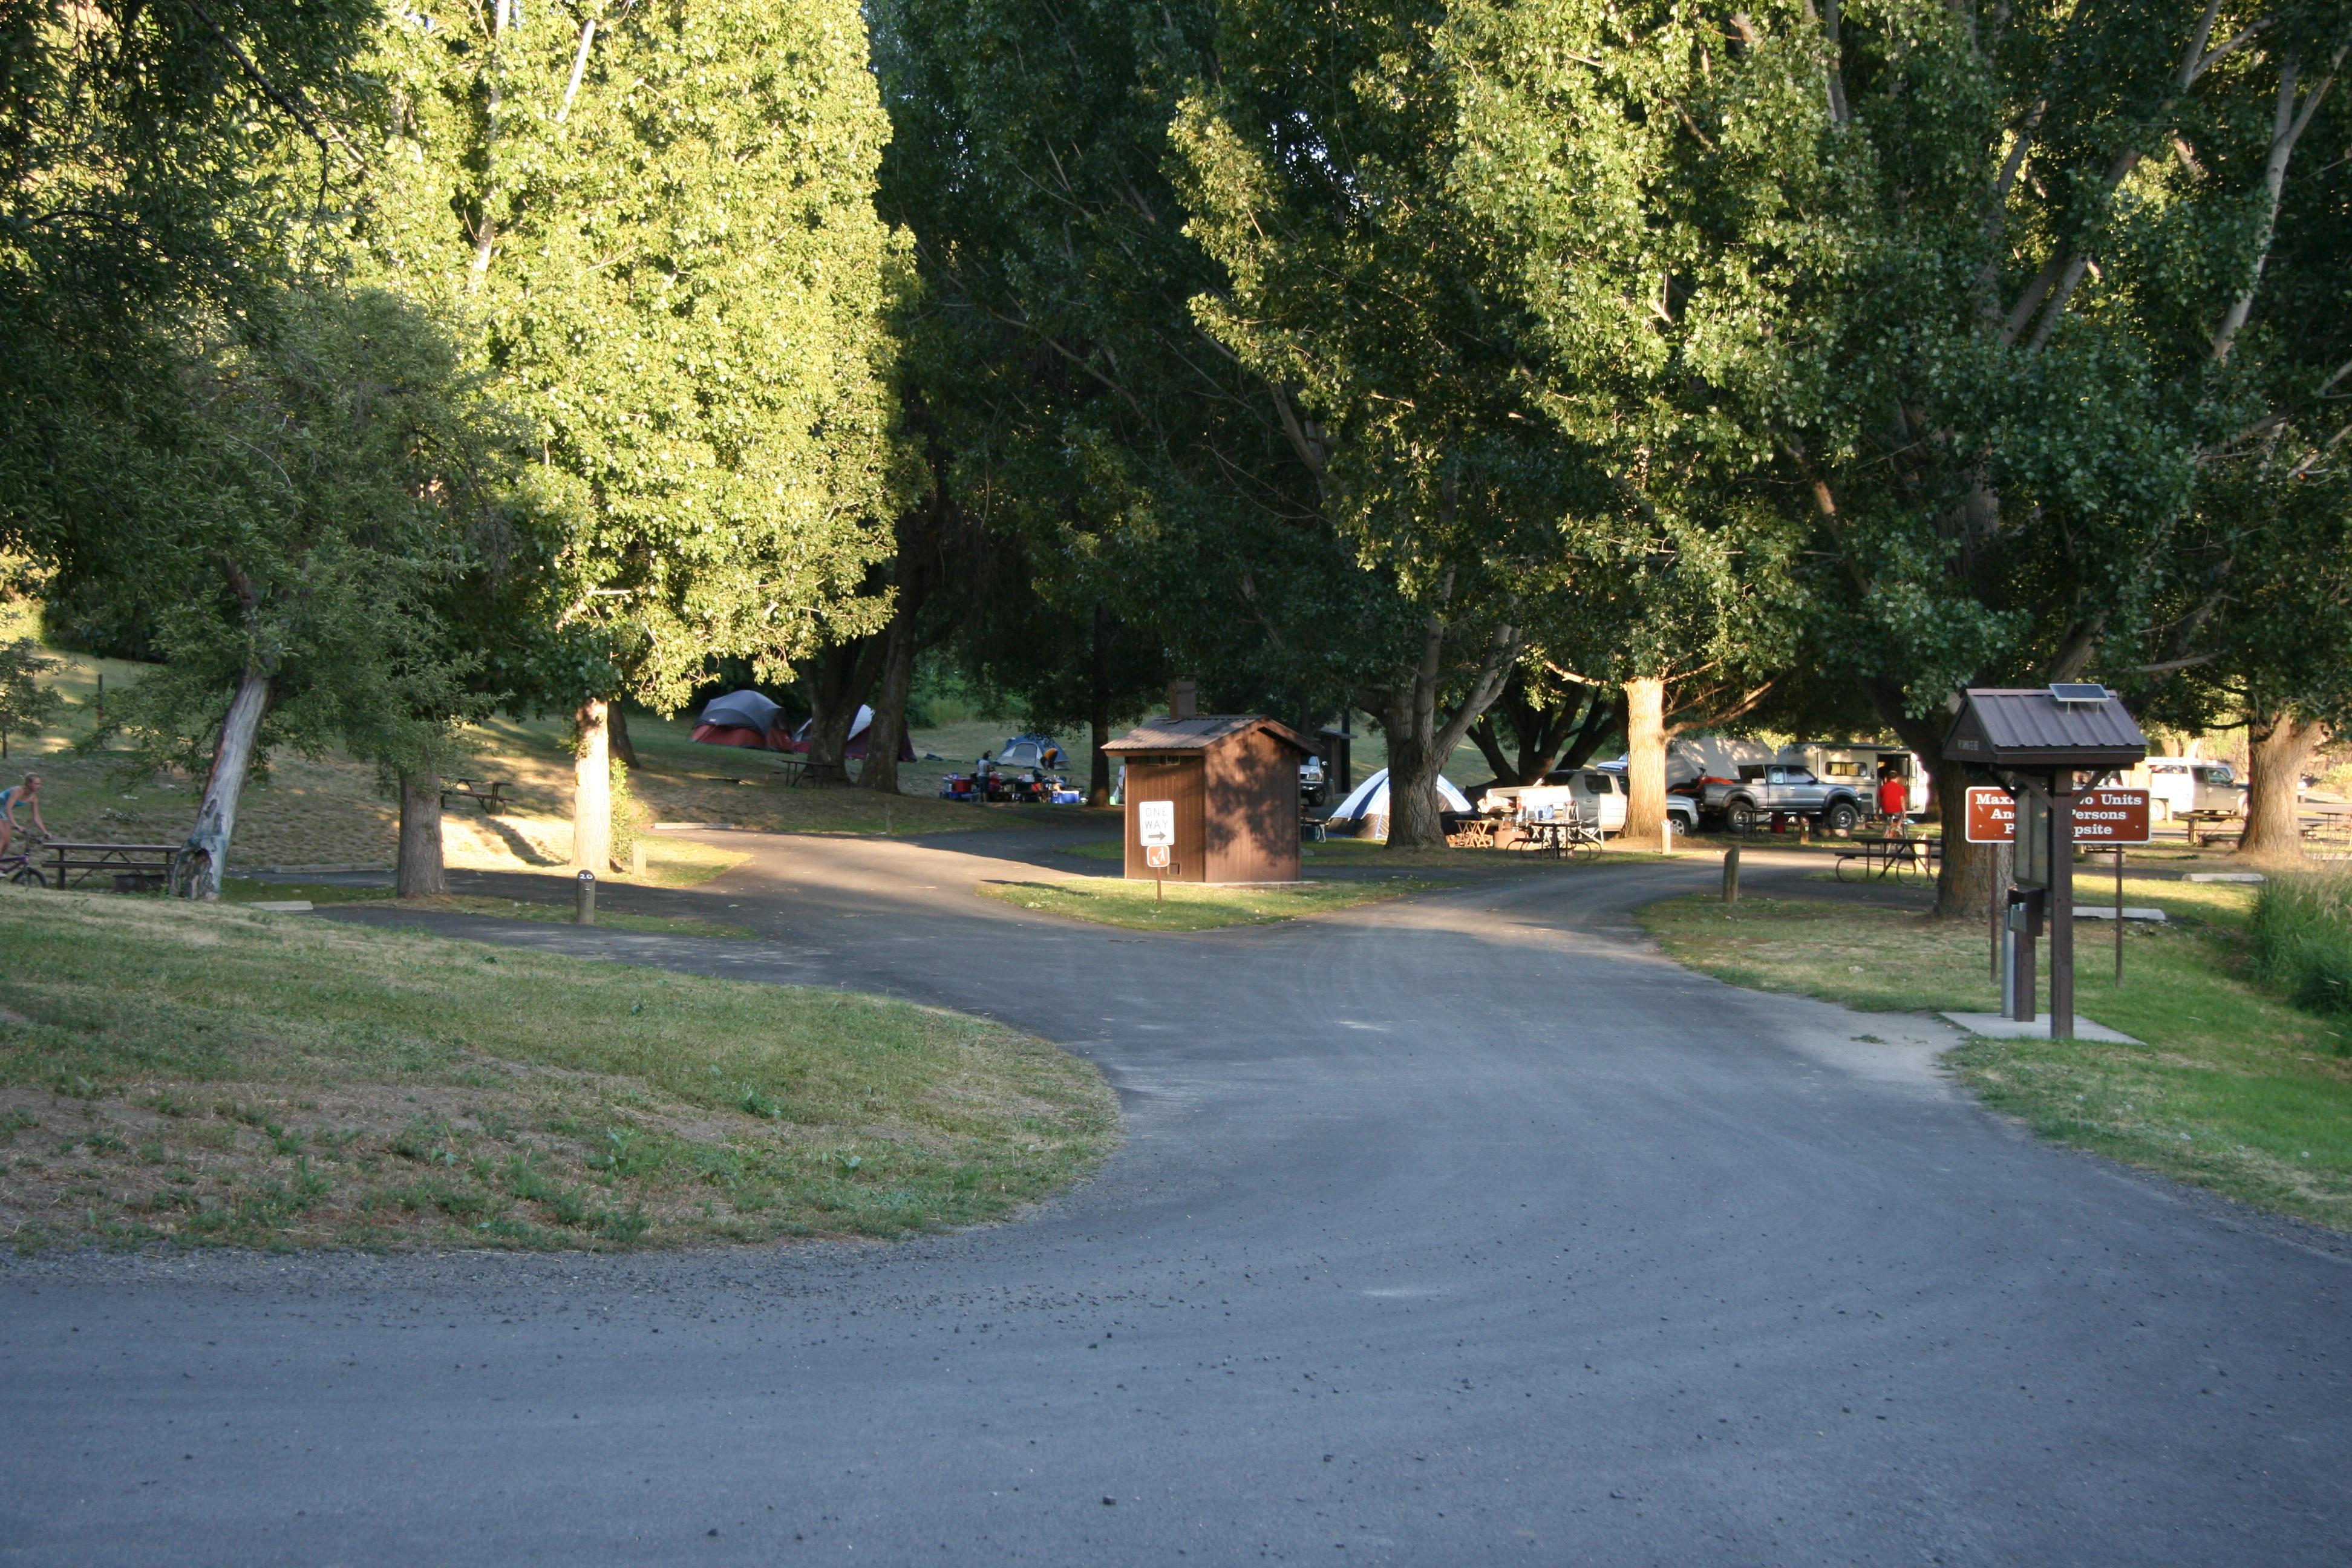 A cluster of tents and RVs are sheltered at campsites among the trees.